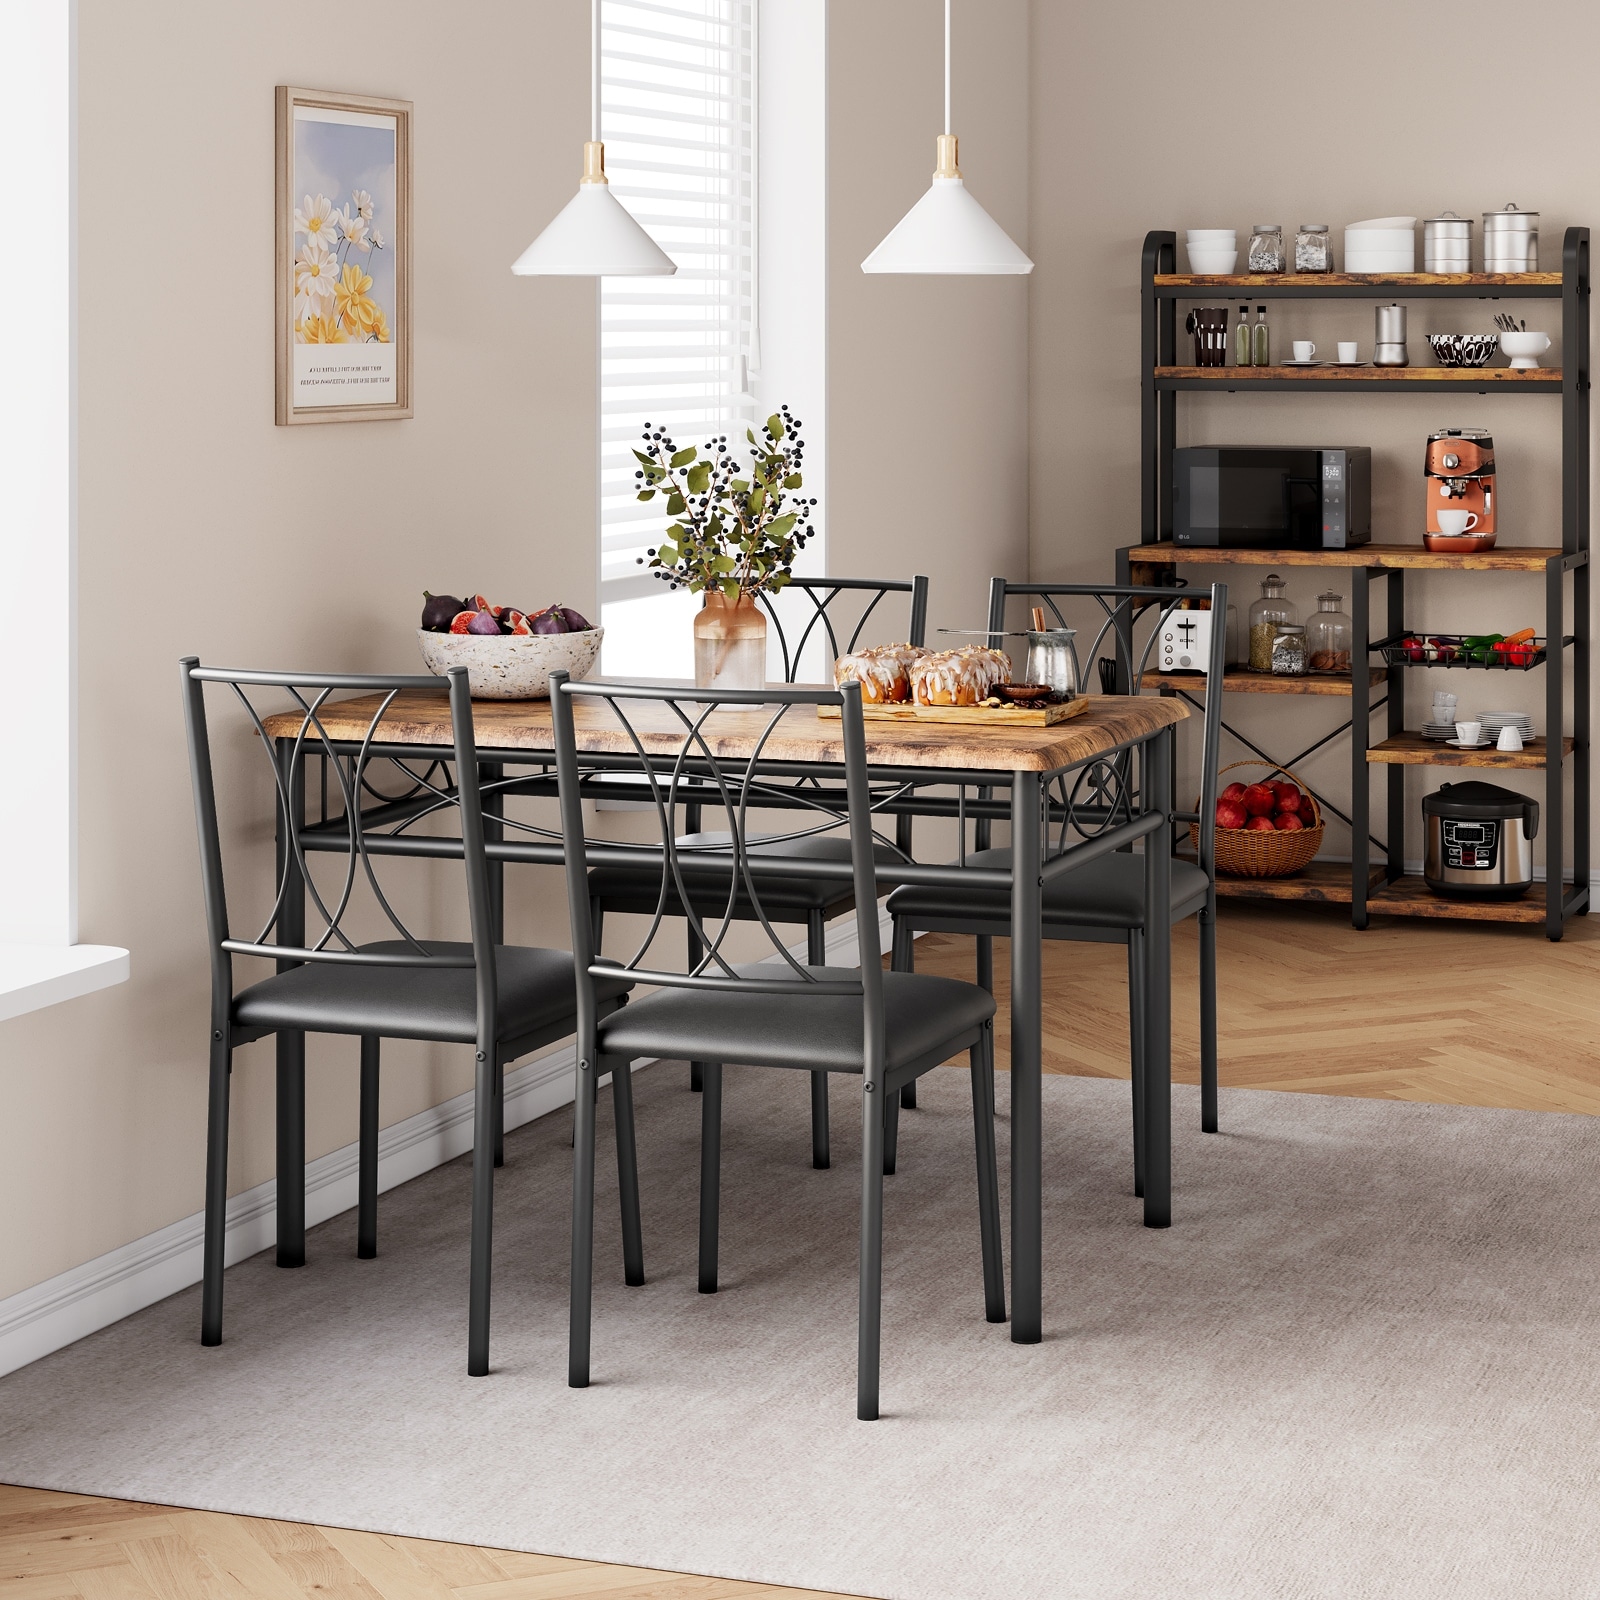 https://ak1.ostkcdn.com/images/products/is/images/direct/856e7a5121563242fdec0e913c9e5598d005a899/Modern-Farmhouse-Rustic-Brown-Rectangular-Dining-Table-Set-for-Small-Space-Apartment.jpg